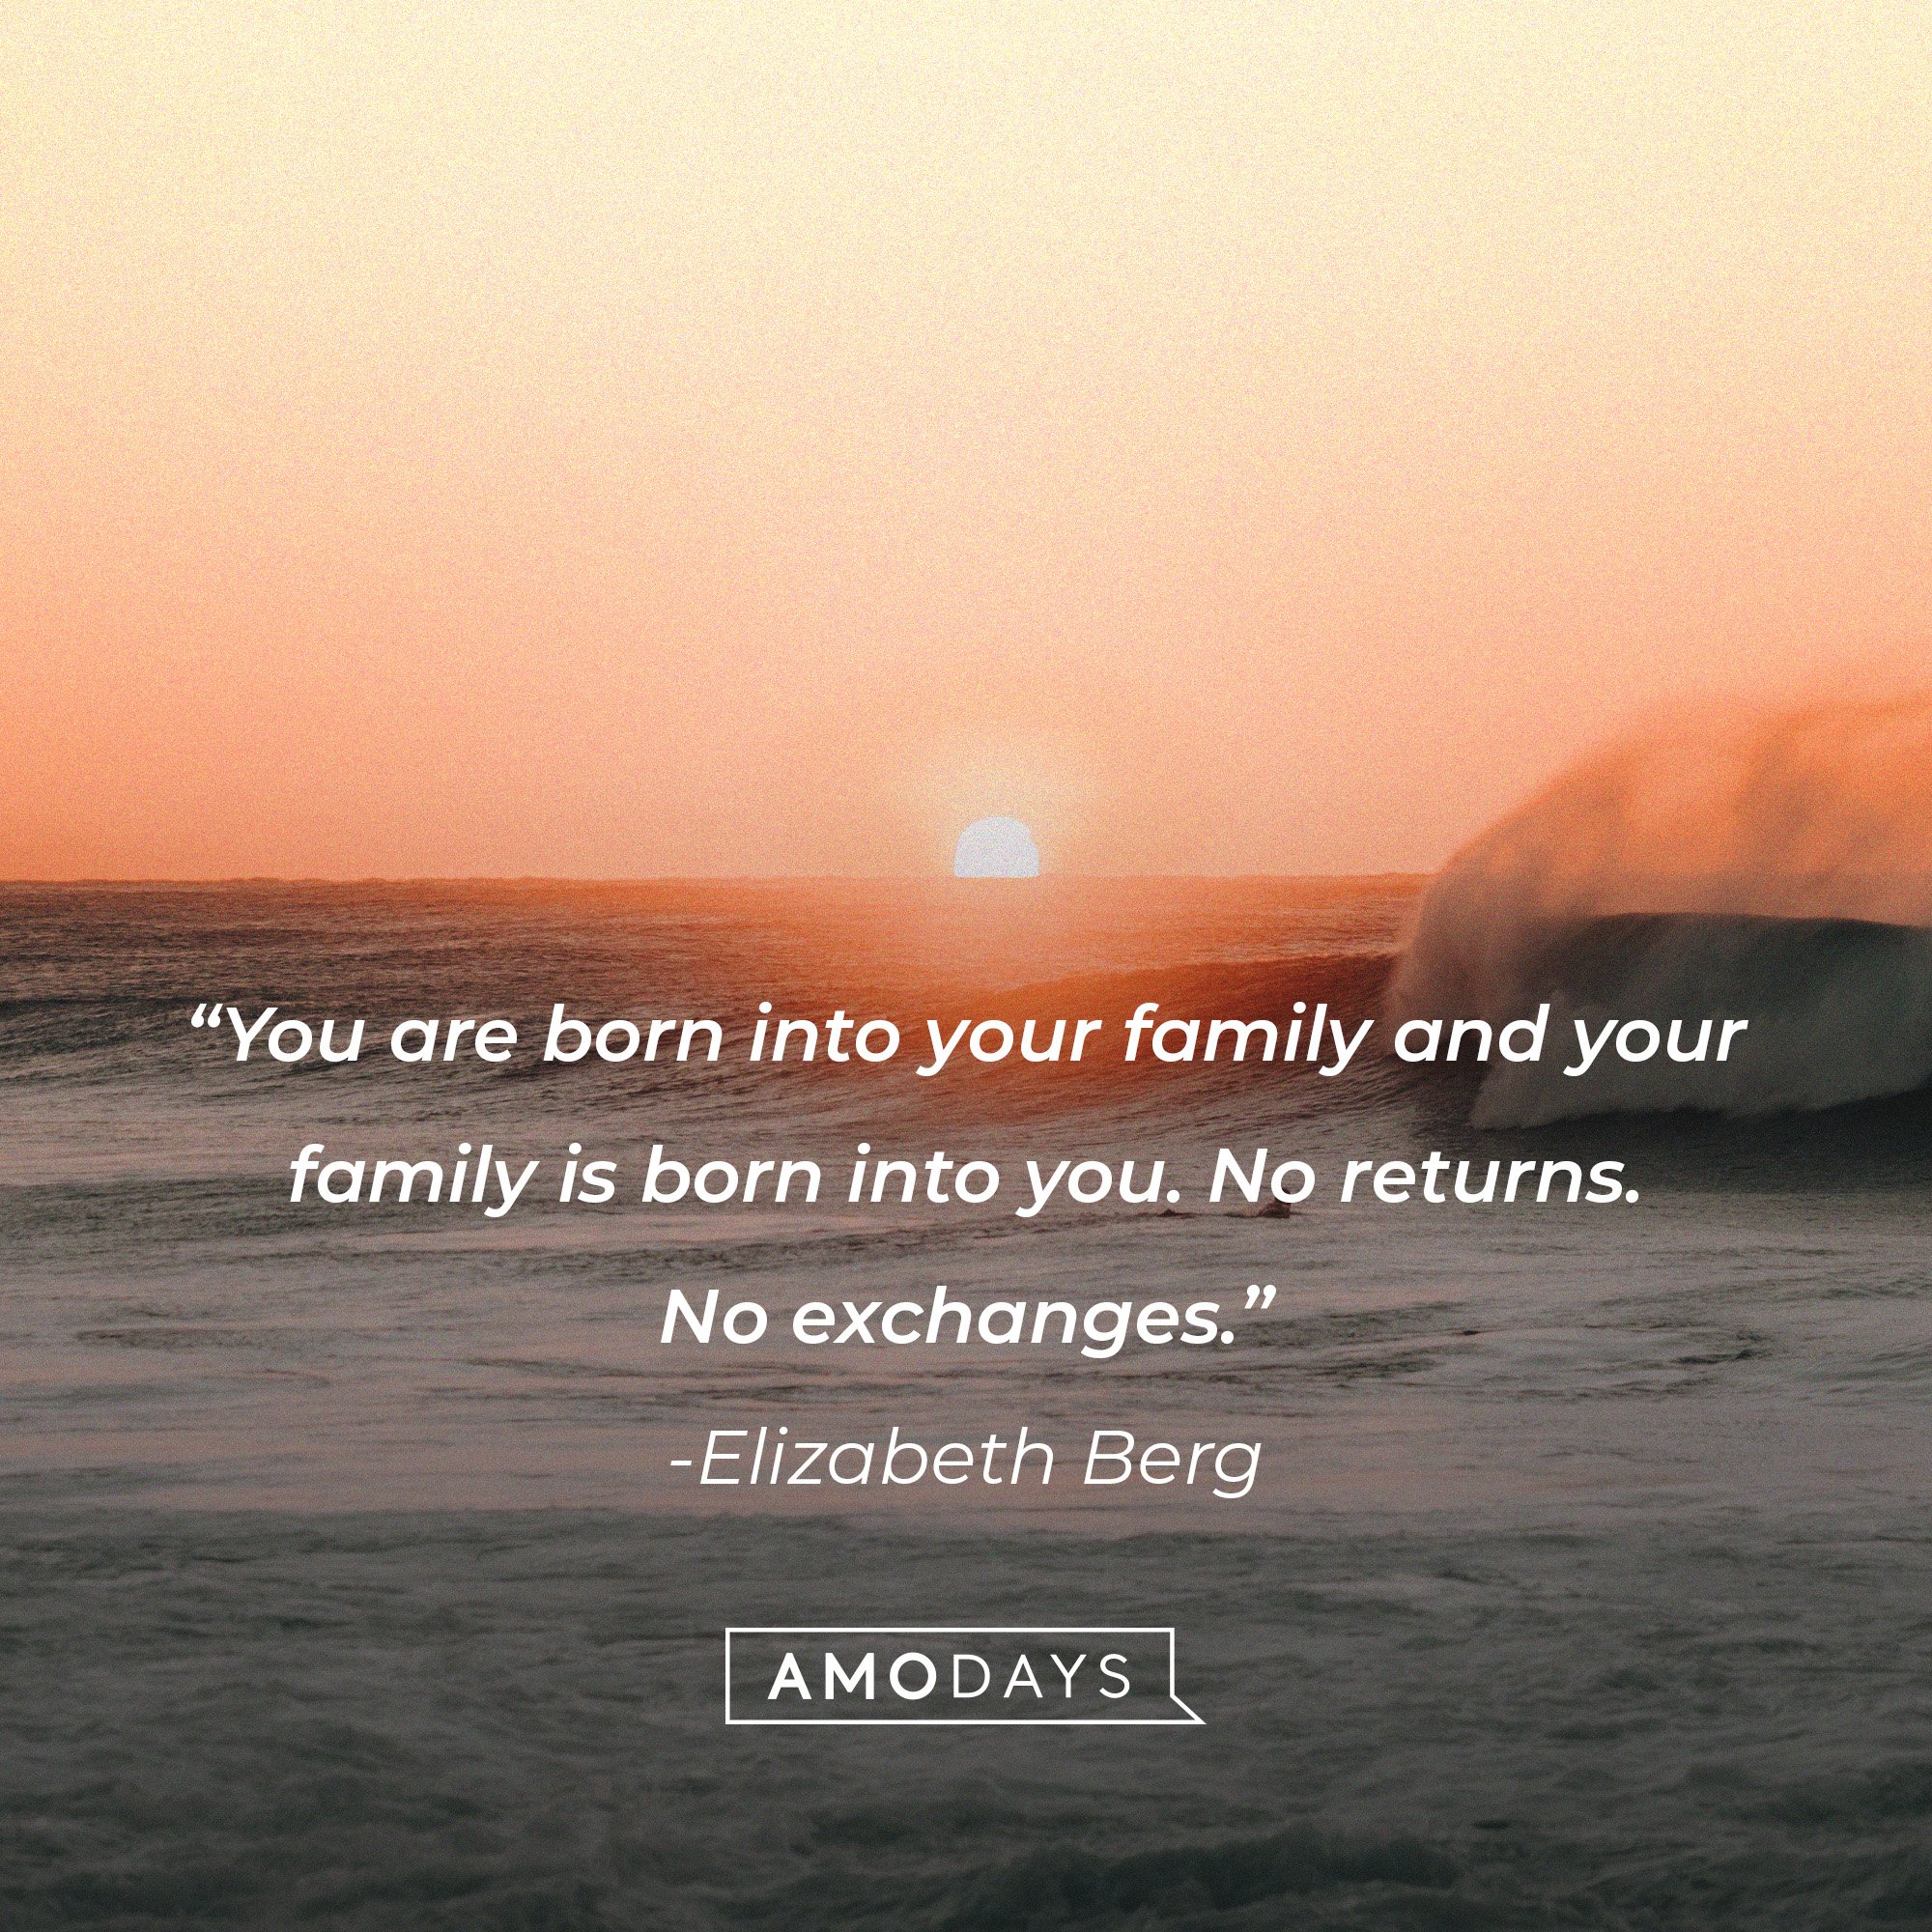 Elizabeth Berg's quote: “You are born into your family and your family is born into you. No returns. No exchanges.” | Image: AmoDays